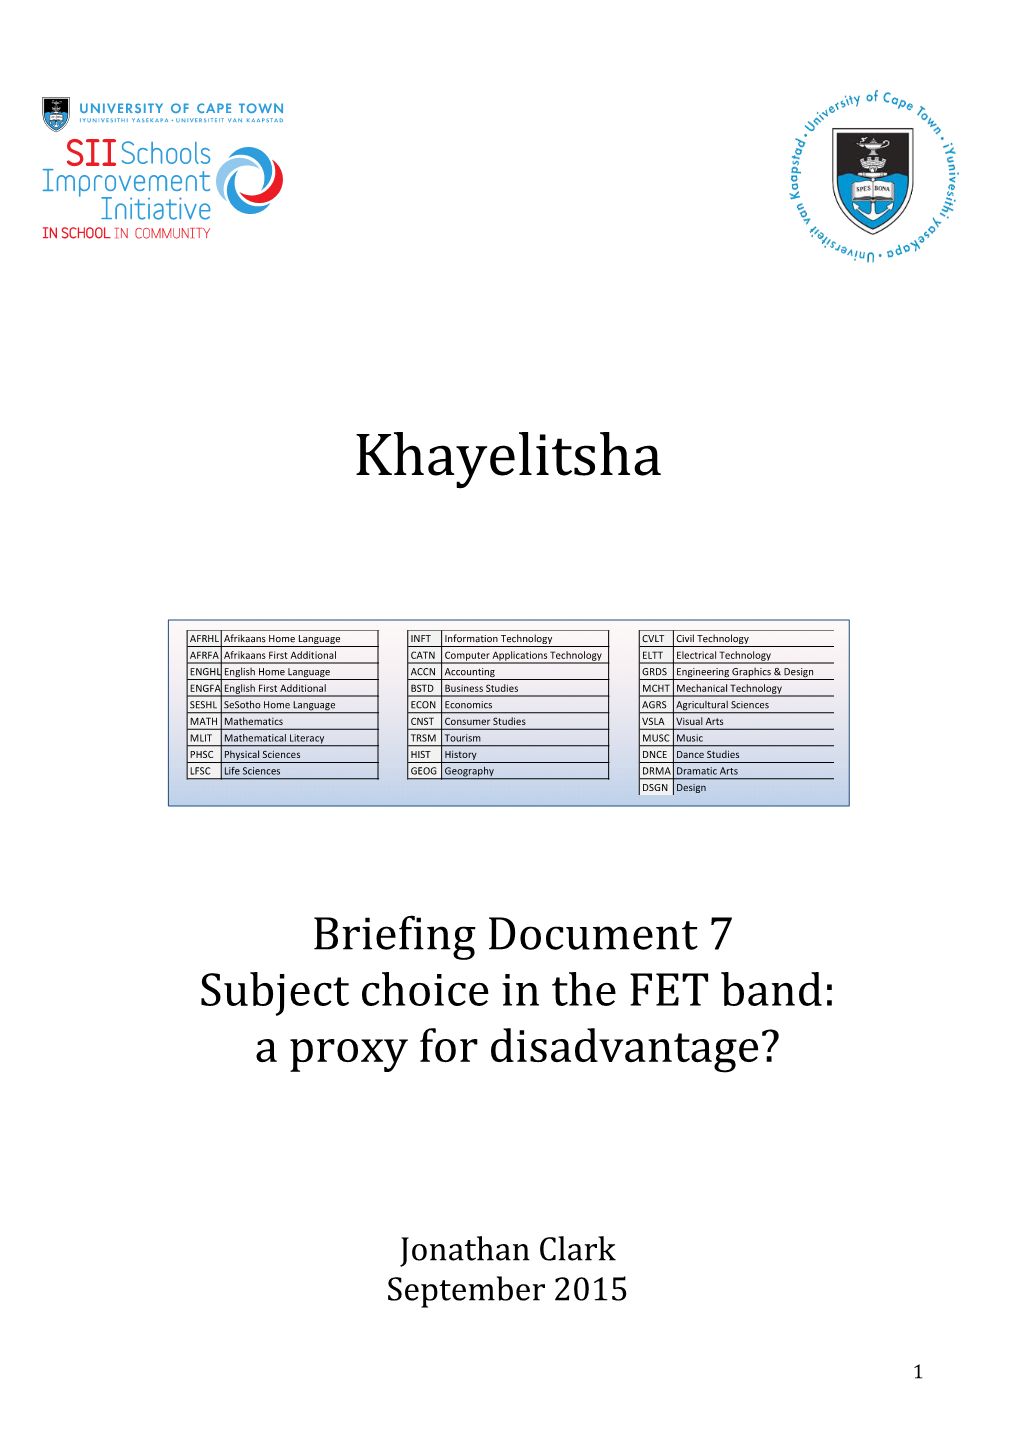 By Way of Comparison, Matric Subject Enrolments in the 20 Khayelitsha Schools Are Considered